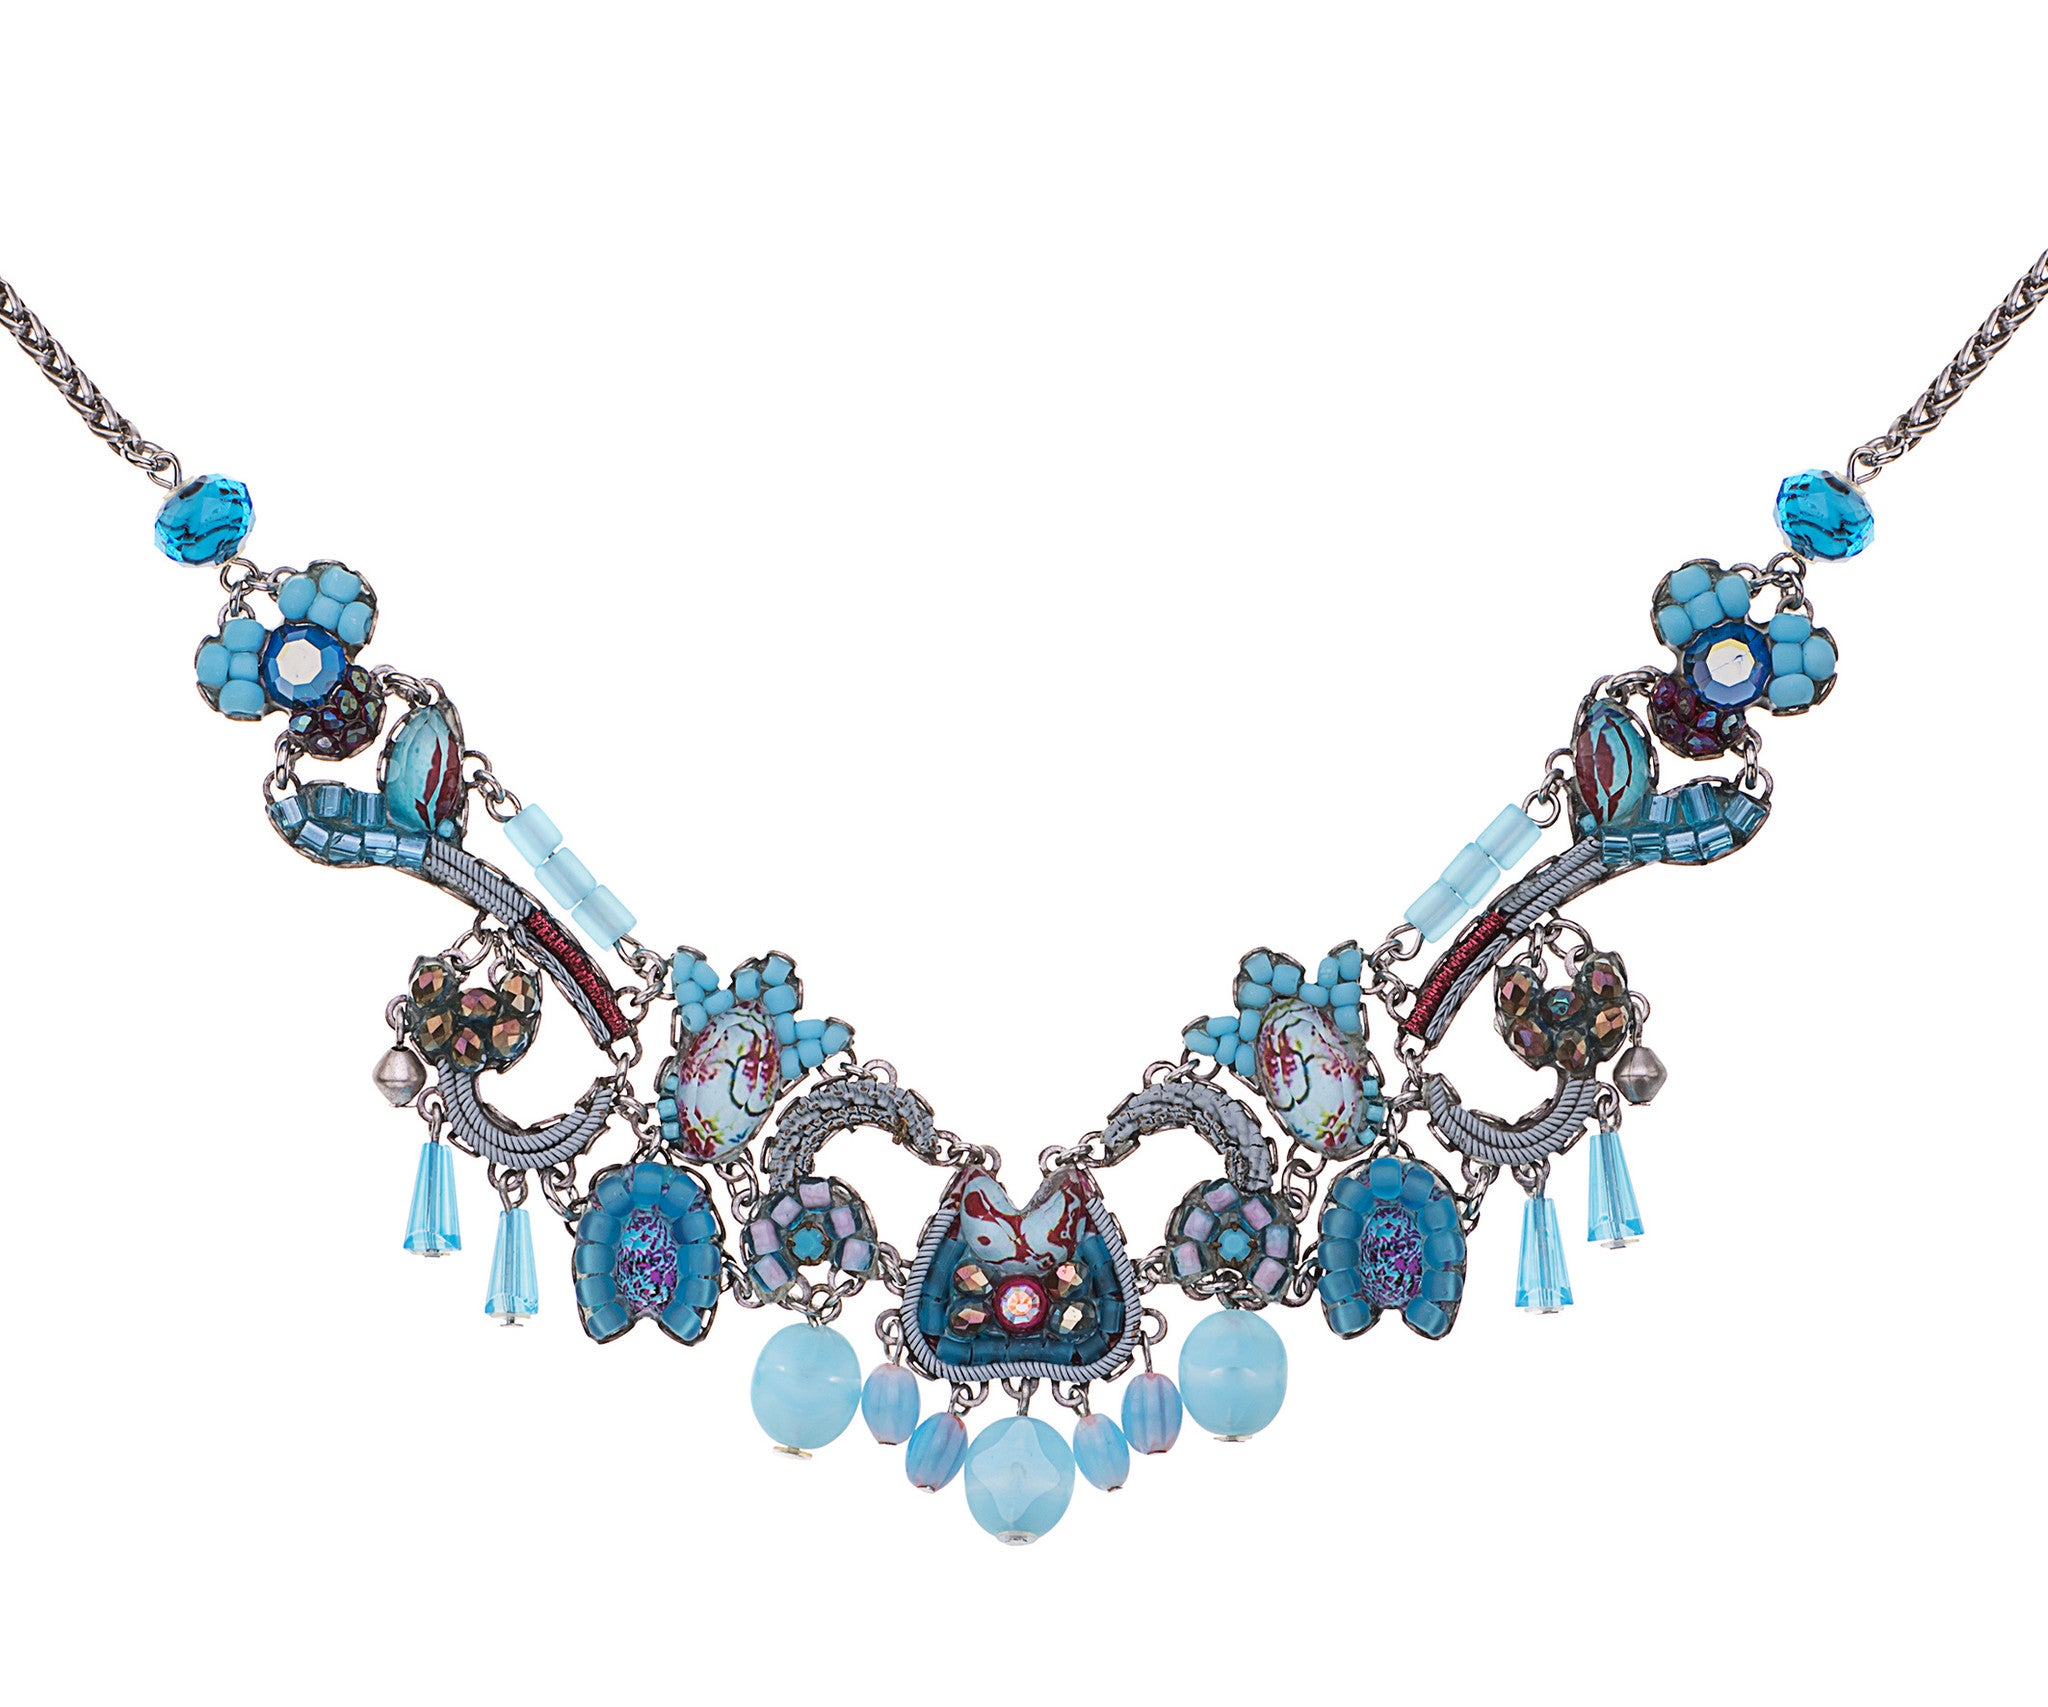 1) Necklace, Turquoise – by:rabinowitz